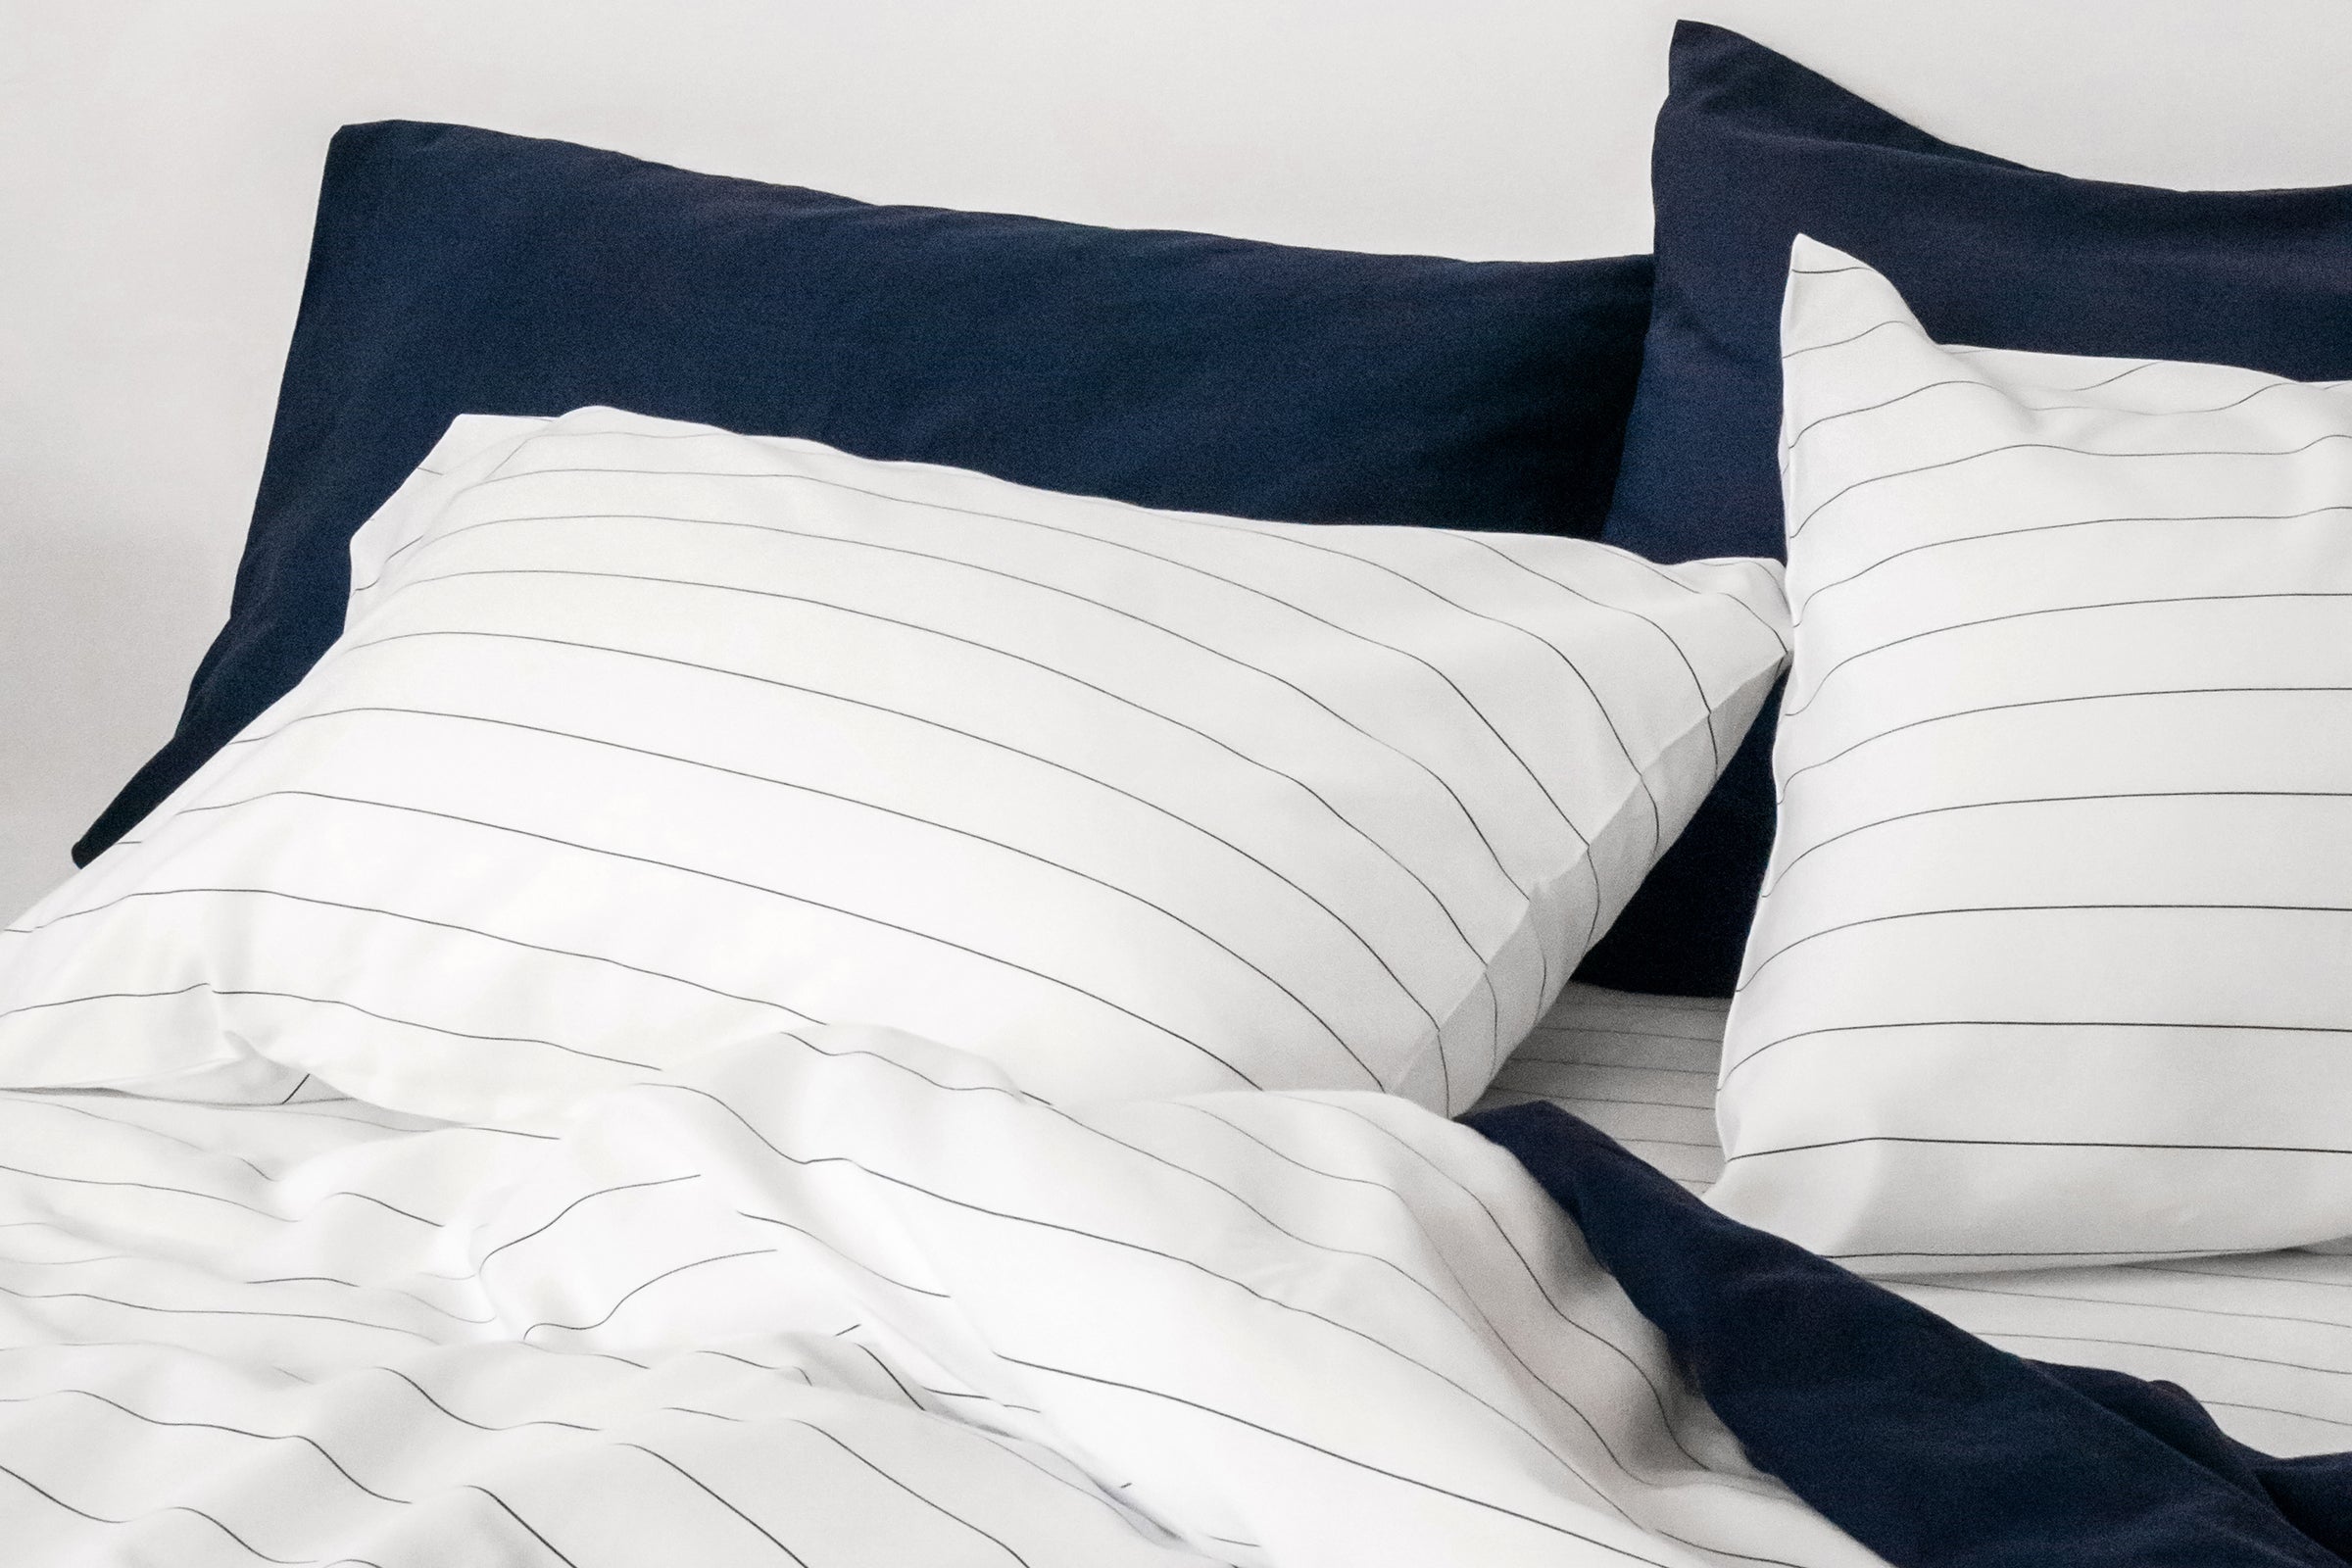 classic-mix-and-match-pinstripes-navy-duvet-set-side-shot-by-sojao.jpg